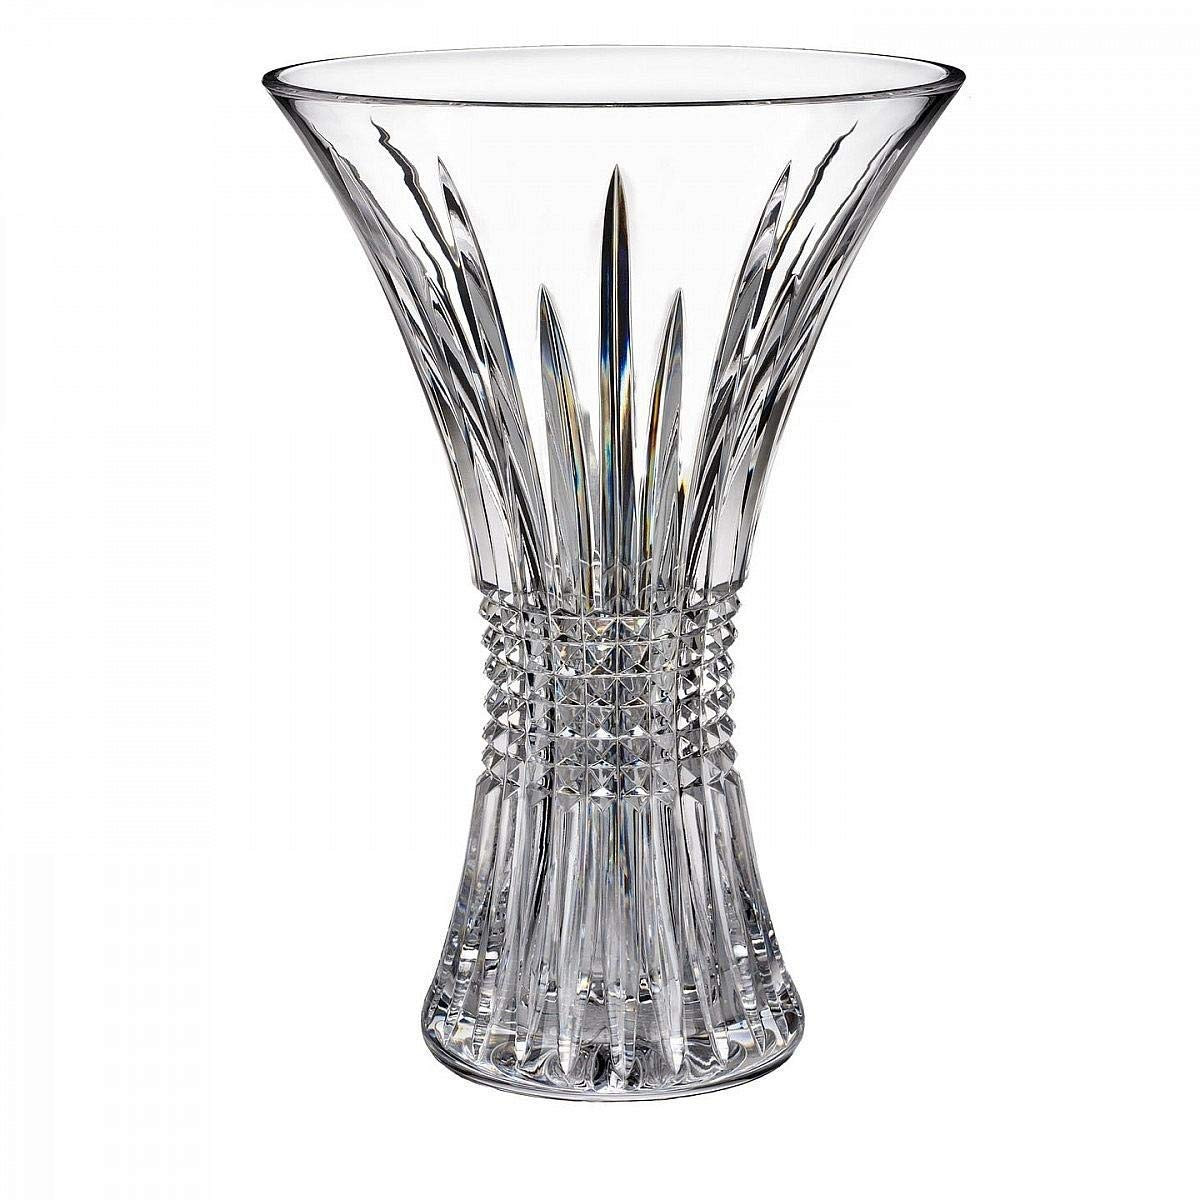 22 Lovable Marquis by Waterford Markham Vase 9 2024 free download marquis by waterford markham vase 9 of amazon com waterford lismore diamond 14 vase home kitchen with regard to 71lgeqbvjql sl1200